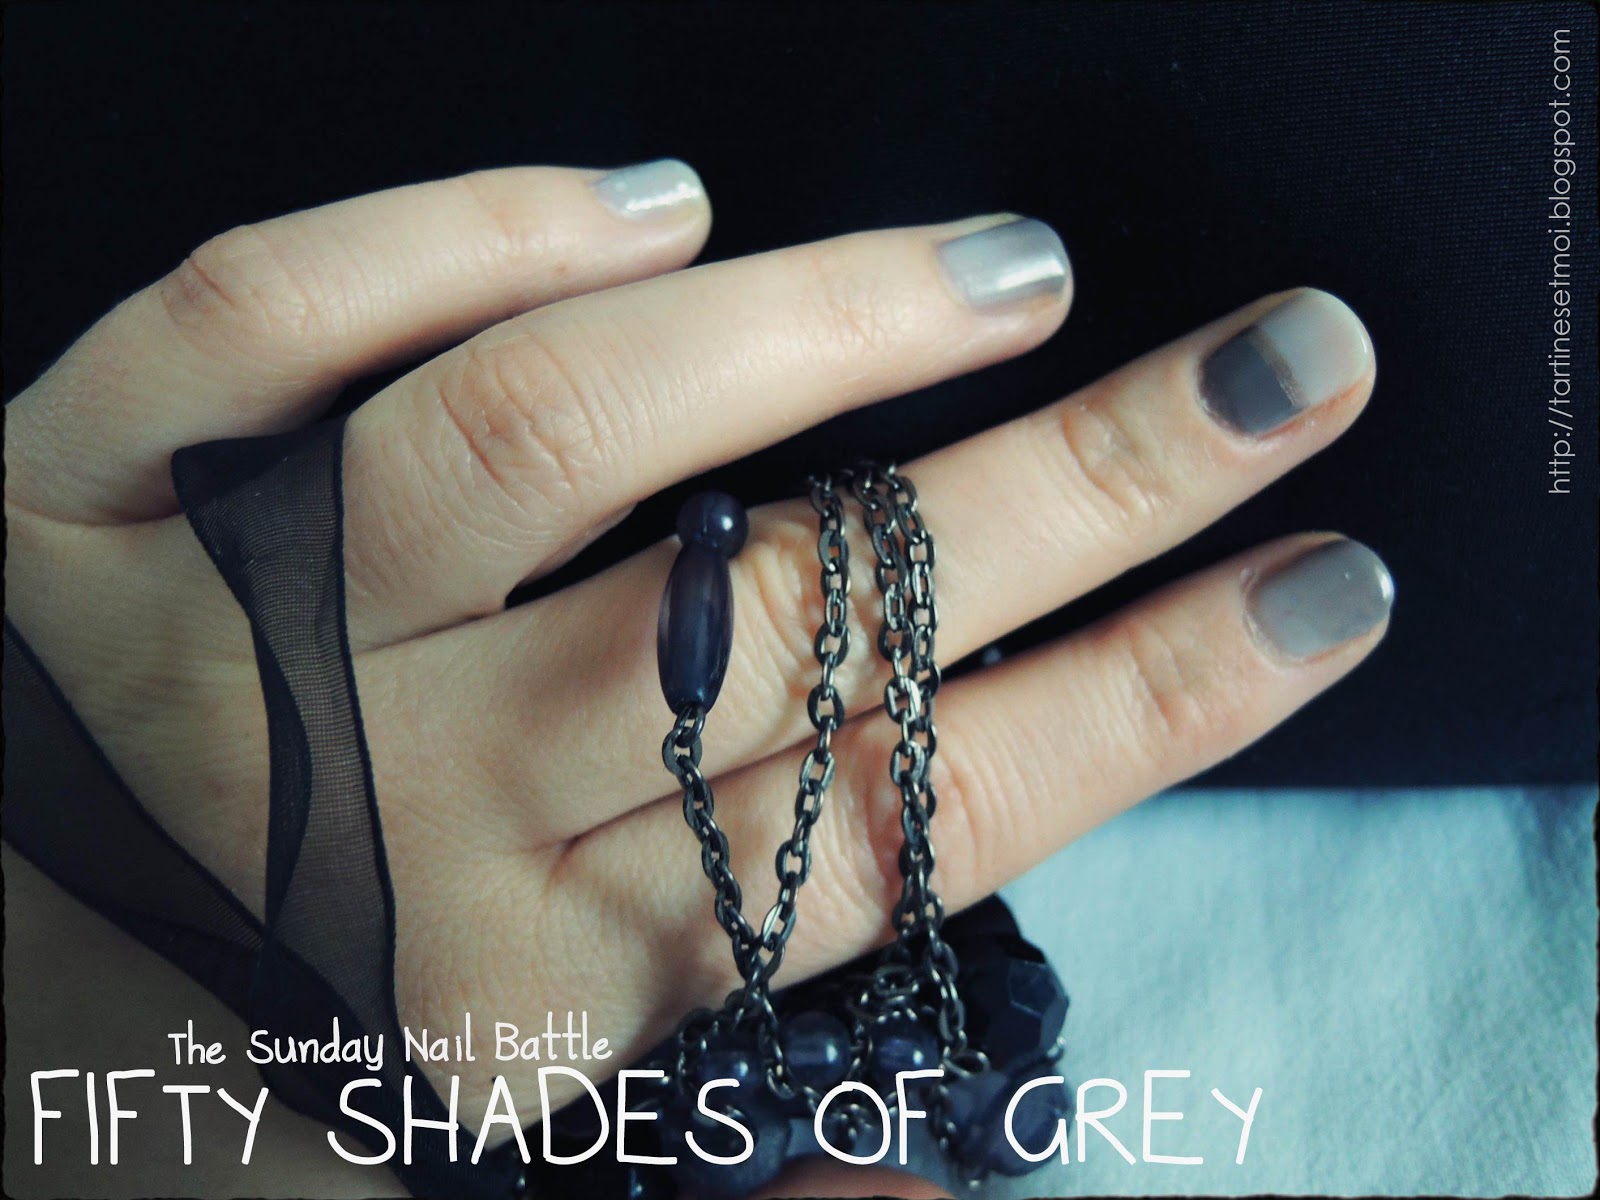 4. "Fifty Shades of Grey" Nail Art Inspiration - wide 5